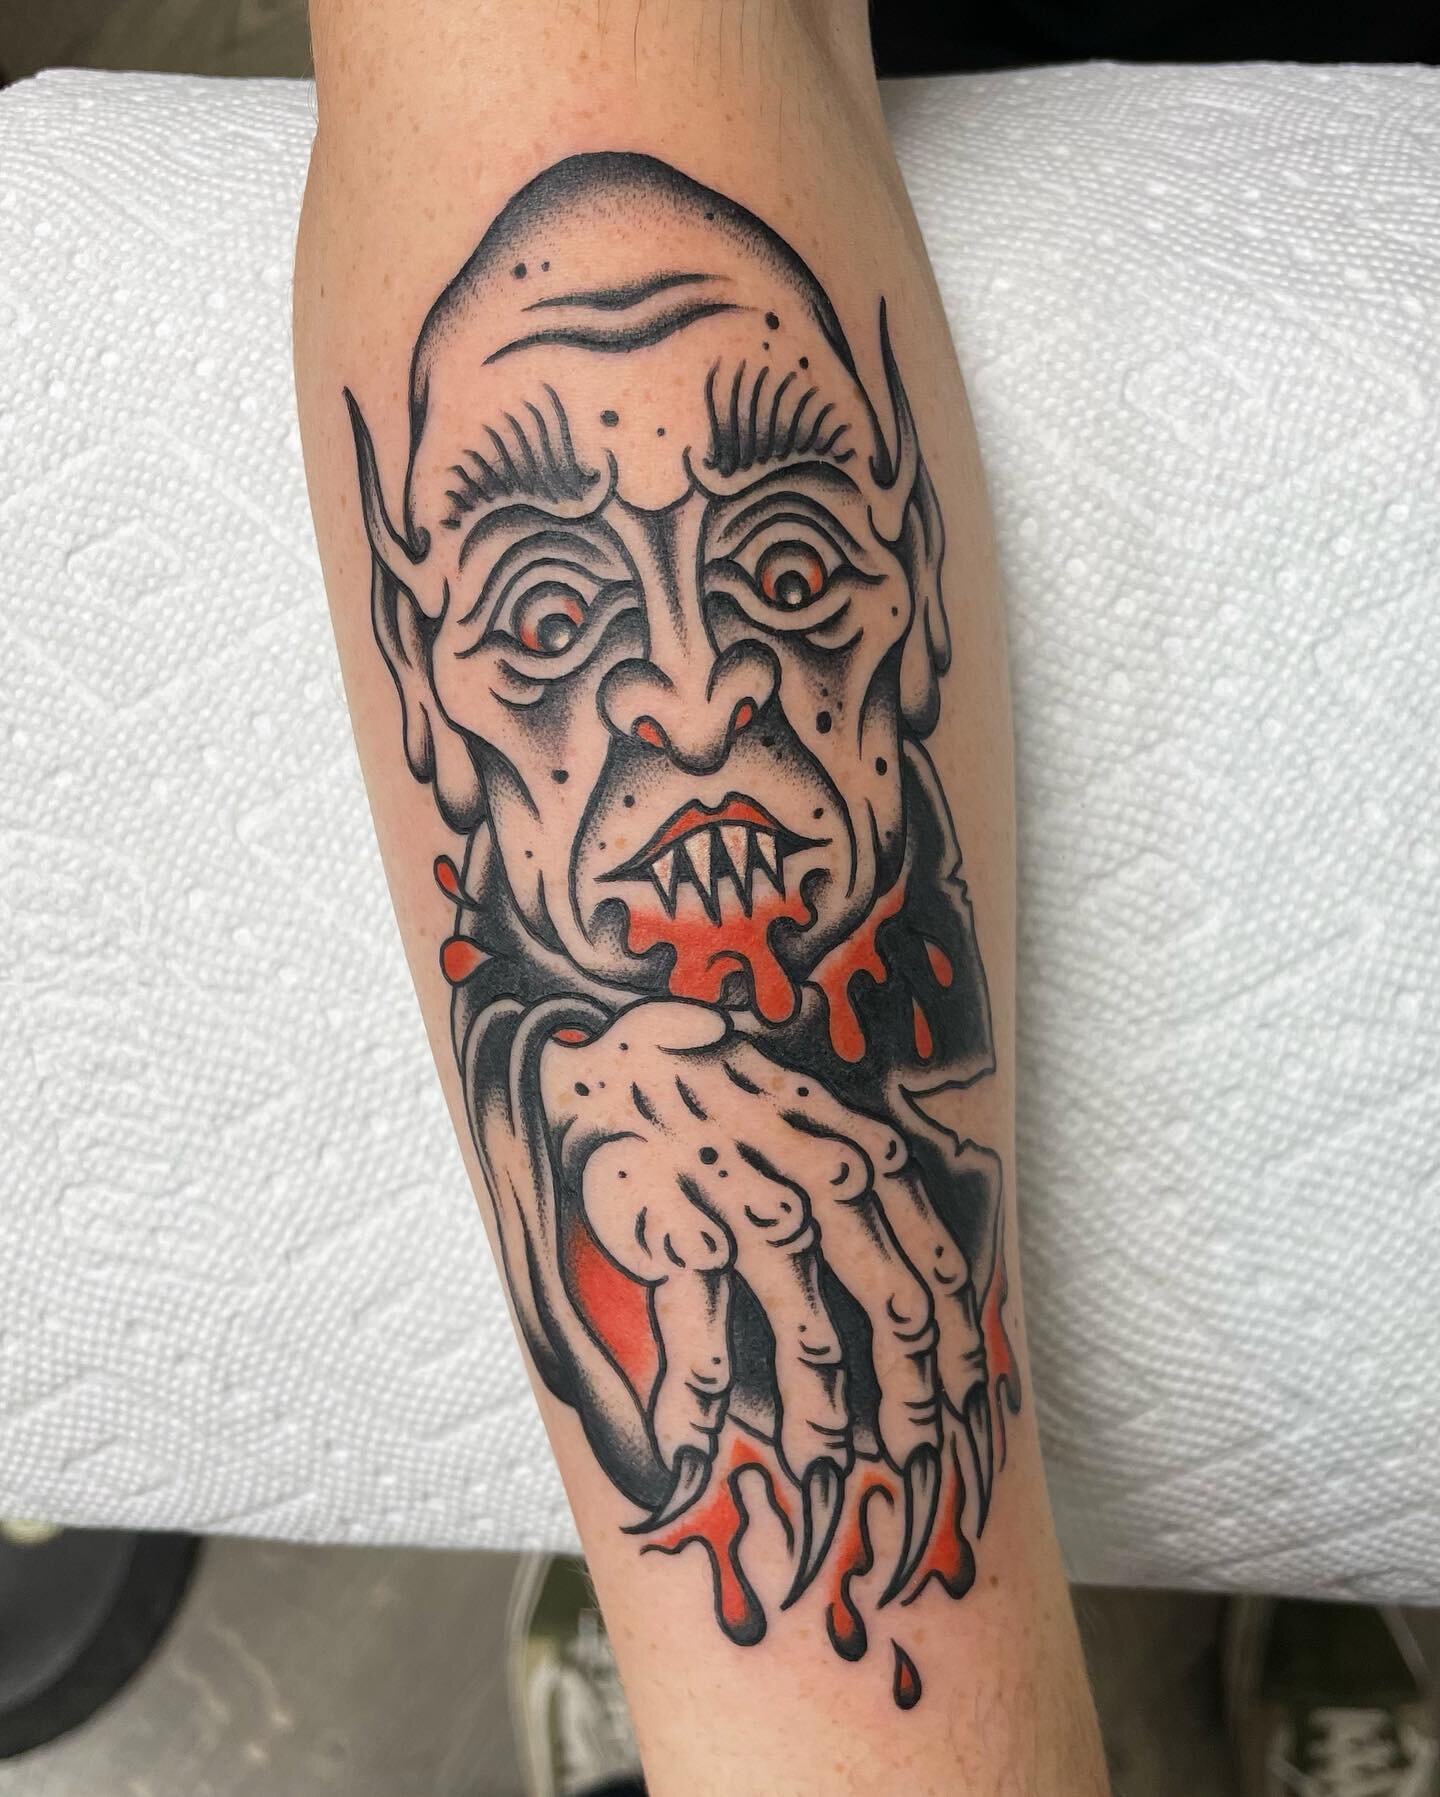 Empire Tattoo Pittsburgh  Crypt Keeper done by thunderscorpiontattoos         empiretattooinc empiretattoopittsburgh femaletattooartist  femaleartist pittsburghtattooartist pittsburgh oakland horrortattoo  movietattoo cryptkeeper 